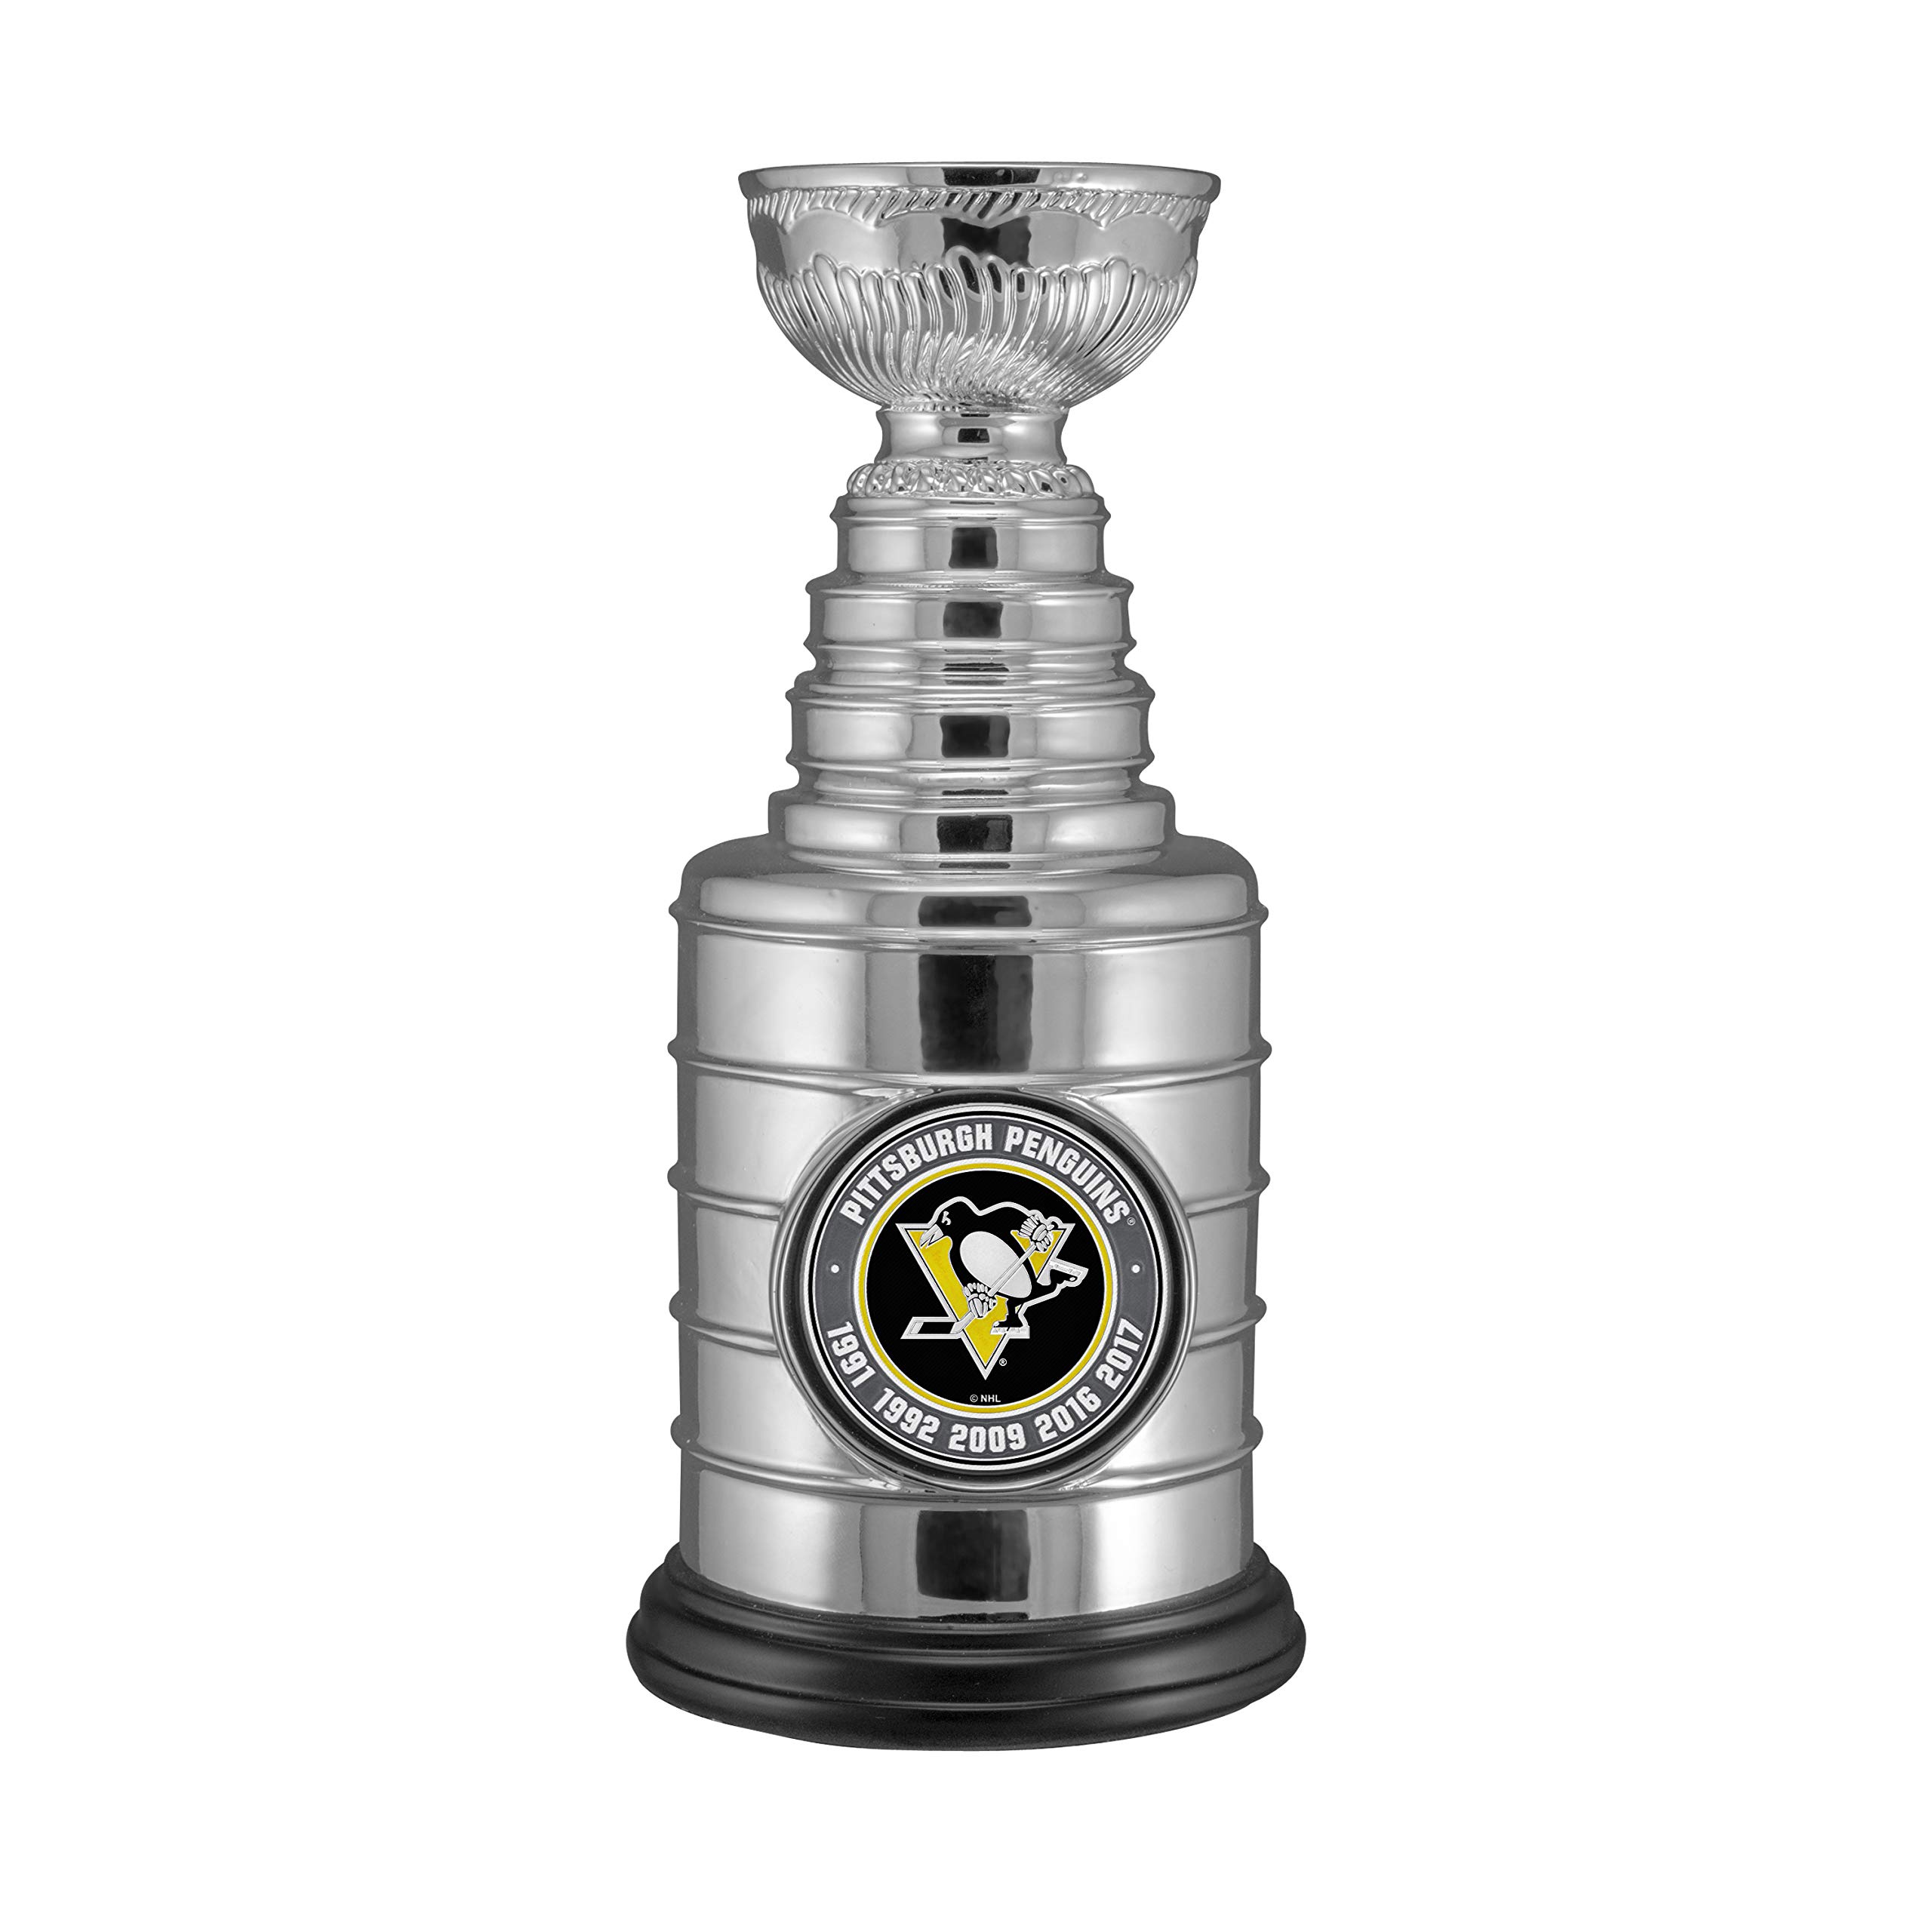 NHL 8-inch Stanley Cup Champions Trophy Replica - Father's Day Gifts for  Dad - Best Gifts for Men, Hockey Fans, Players, Coaches & Collectors